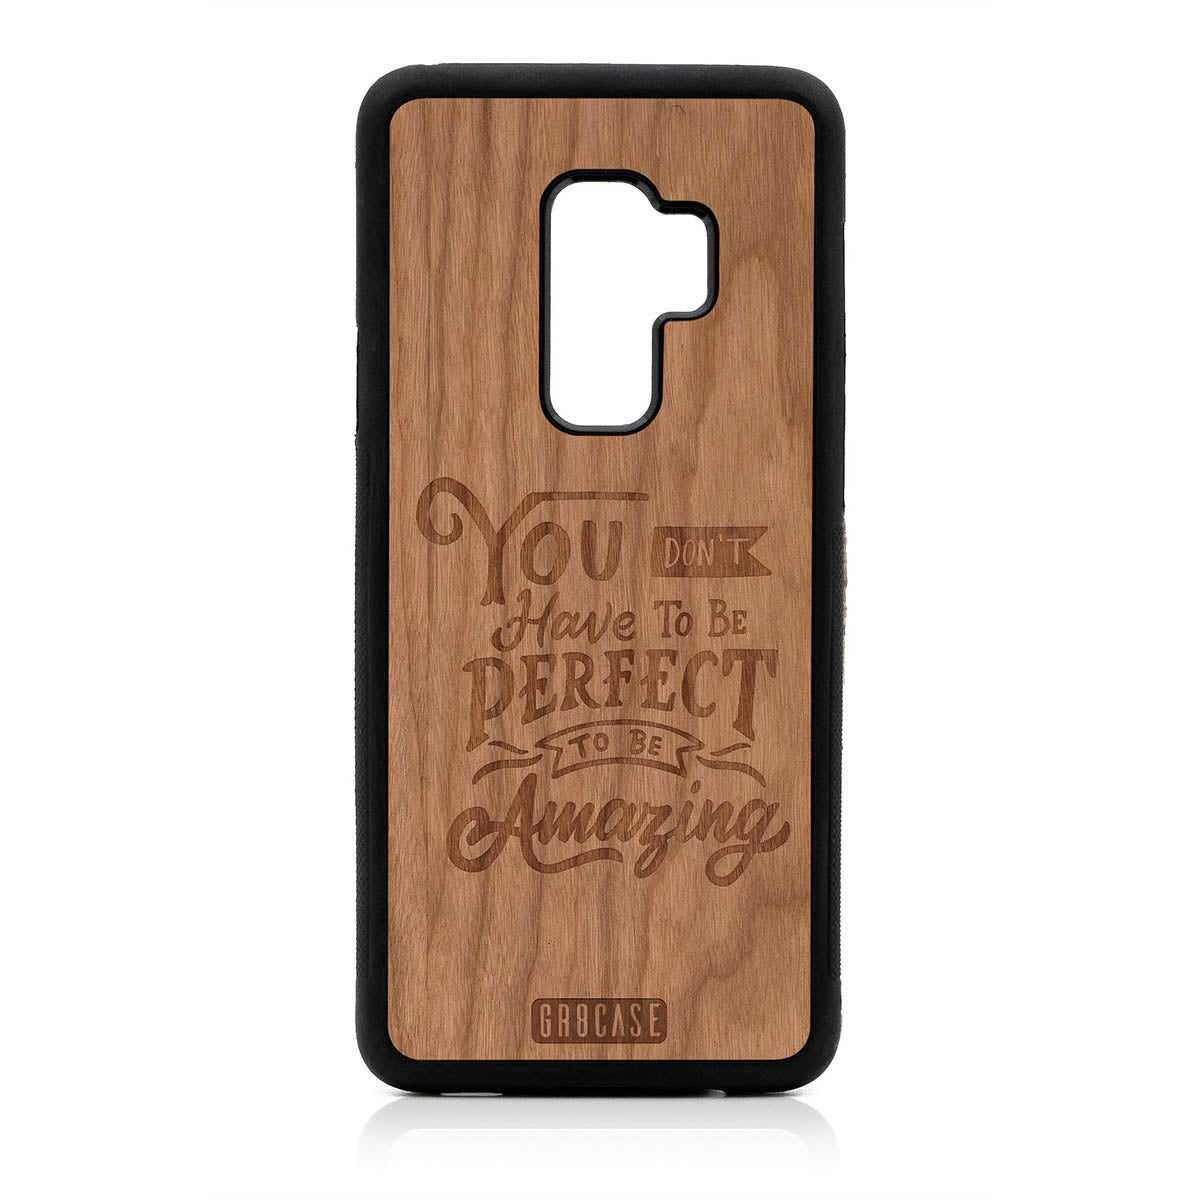 You Don't Have To Be Perfect To Be Amazing Design Wood Case For Samsung Galaxy S9 Plus